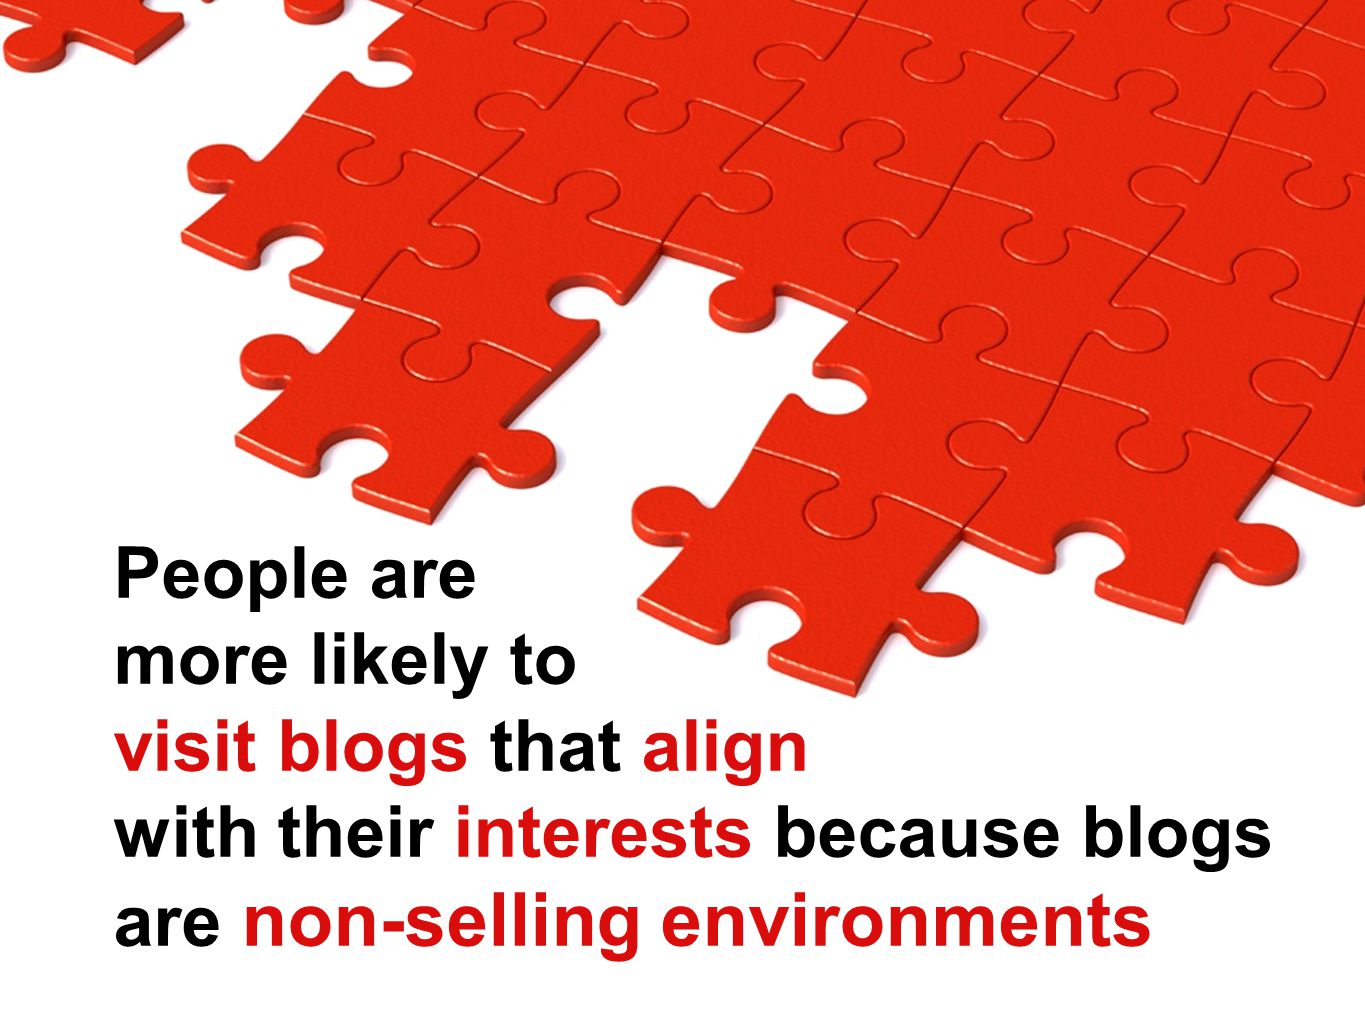 People are more likely to visit blogs that align with their interests because blogs are non-selling environments